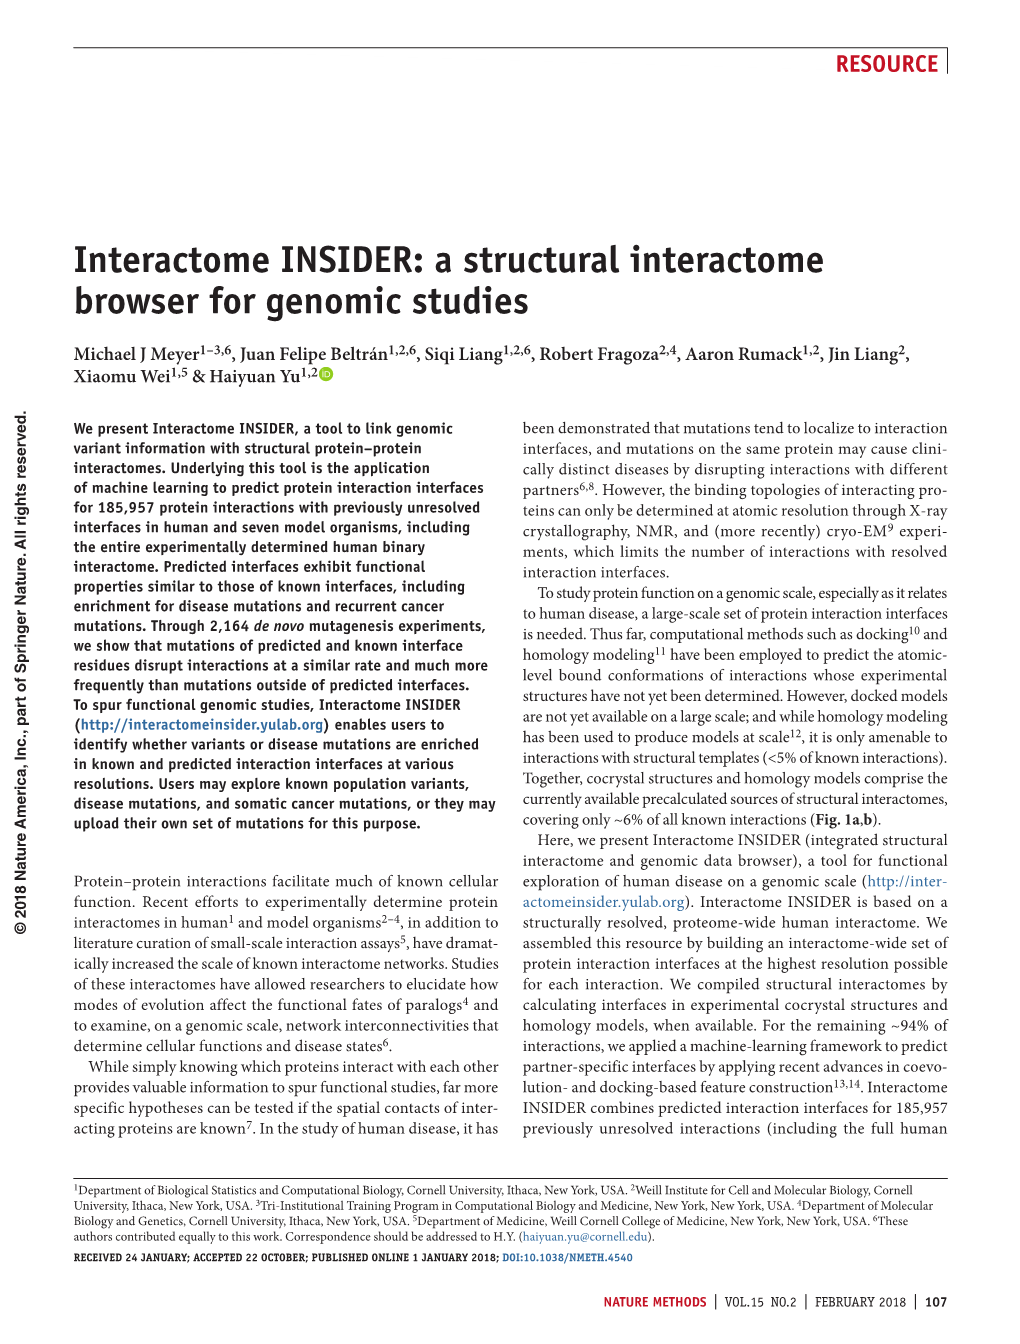 Interactome INSIDER: a Structural Interactome Browser for Genomic Studies